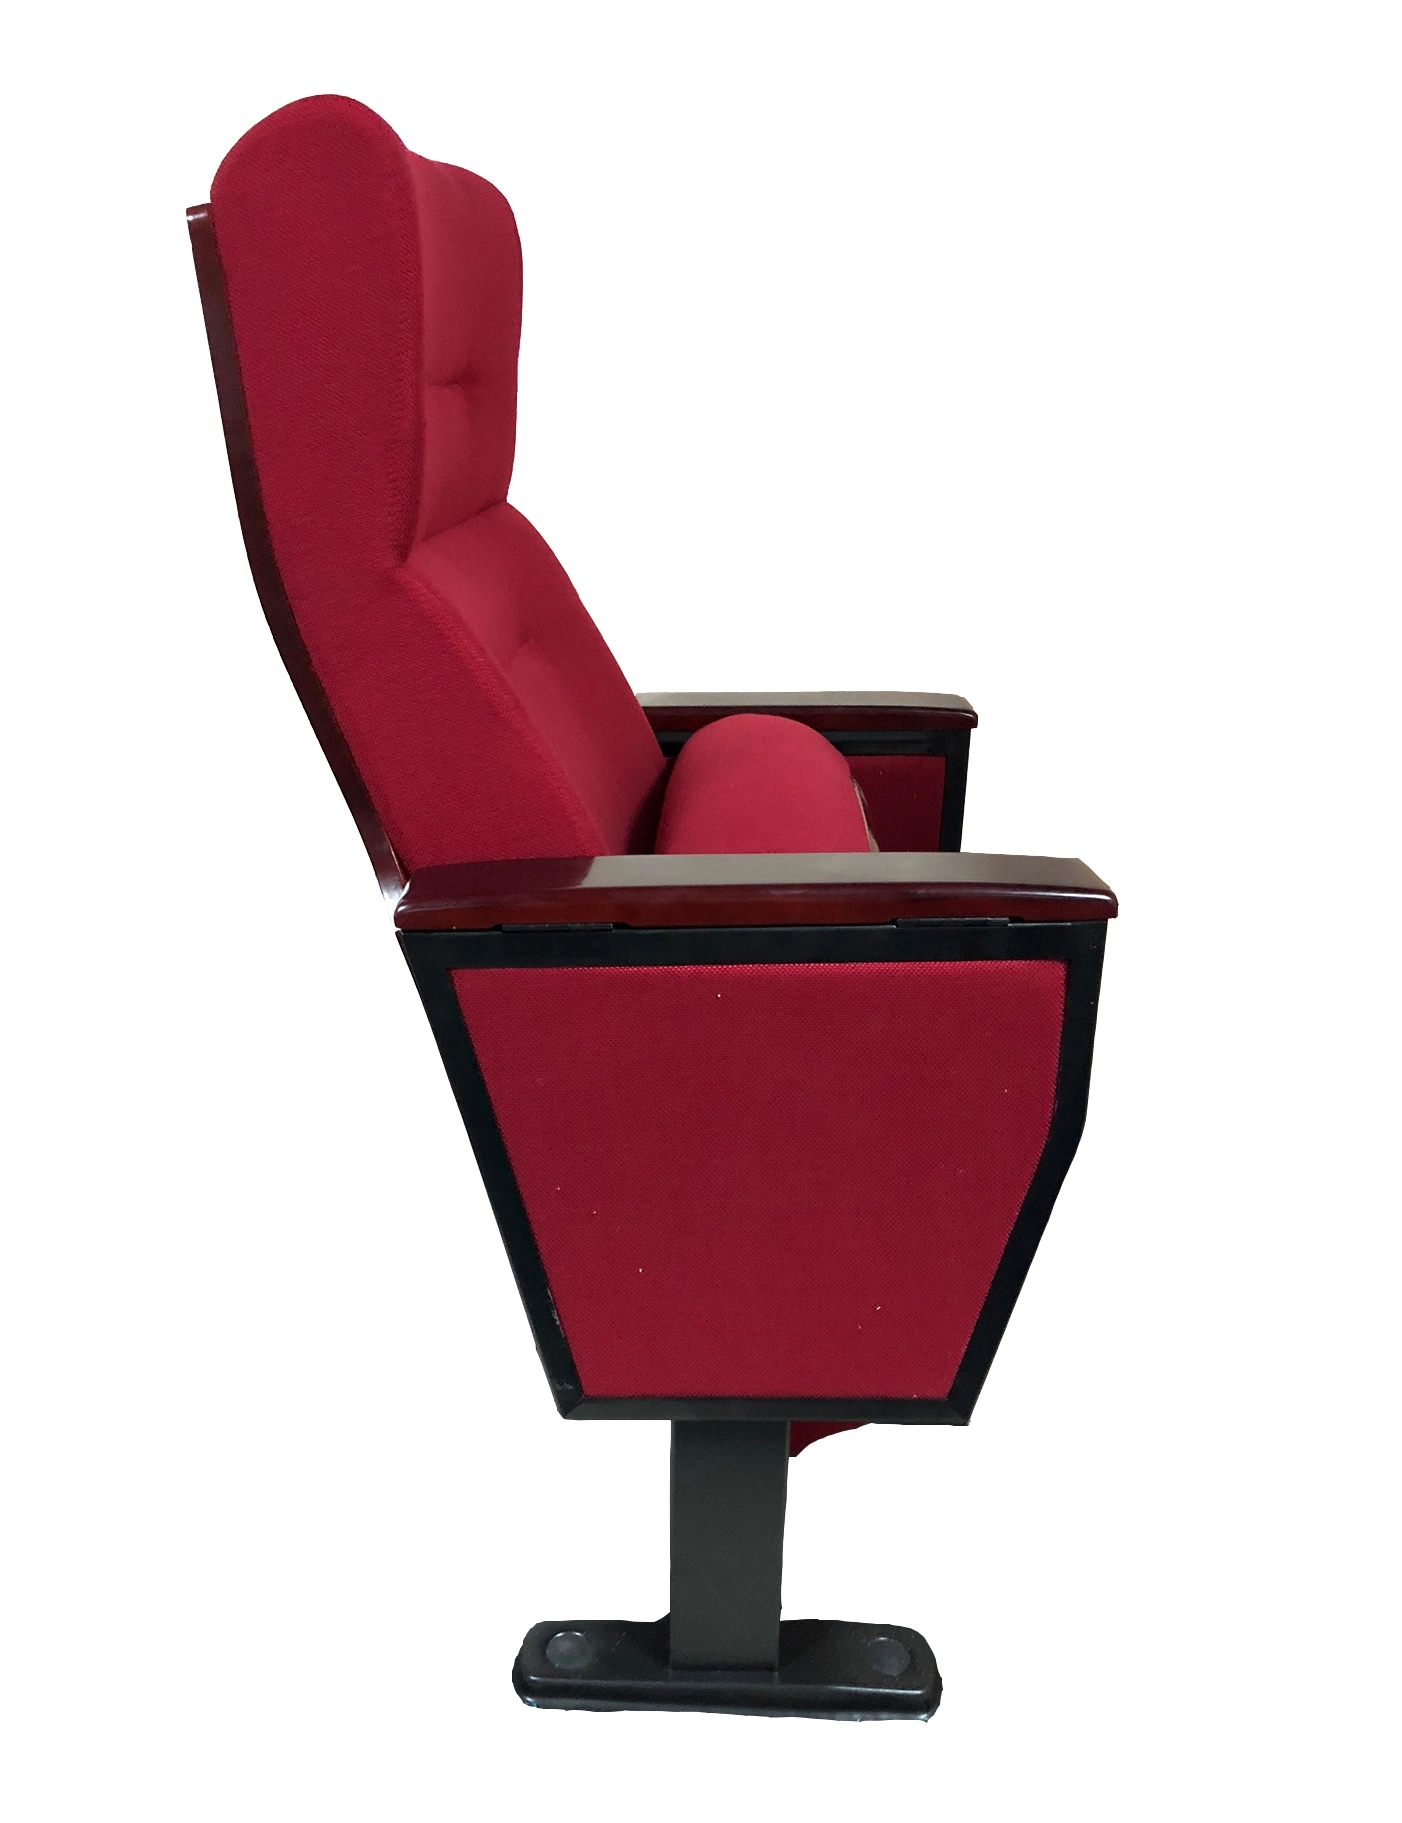 Cinema Chair Auditorium Chair VIP Theater Seats Theater Seating Furniture